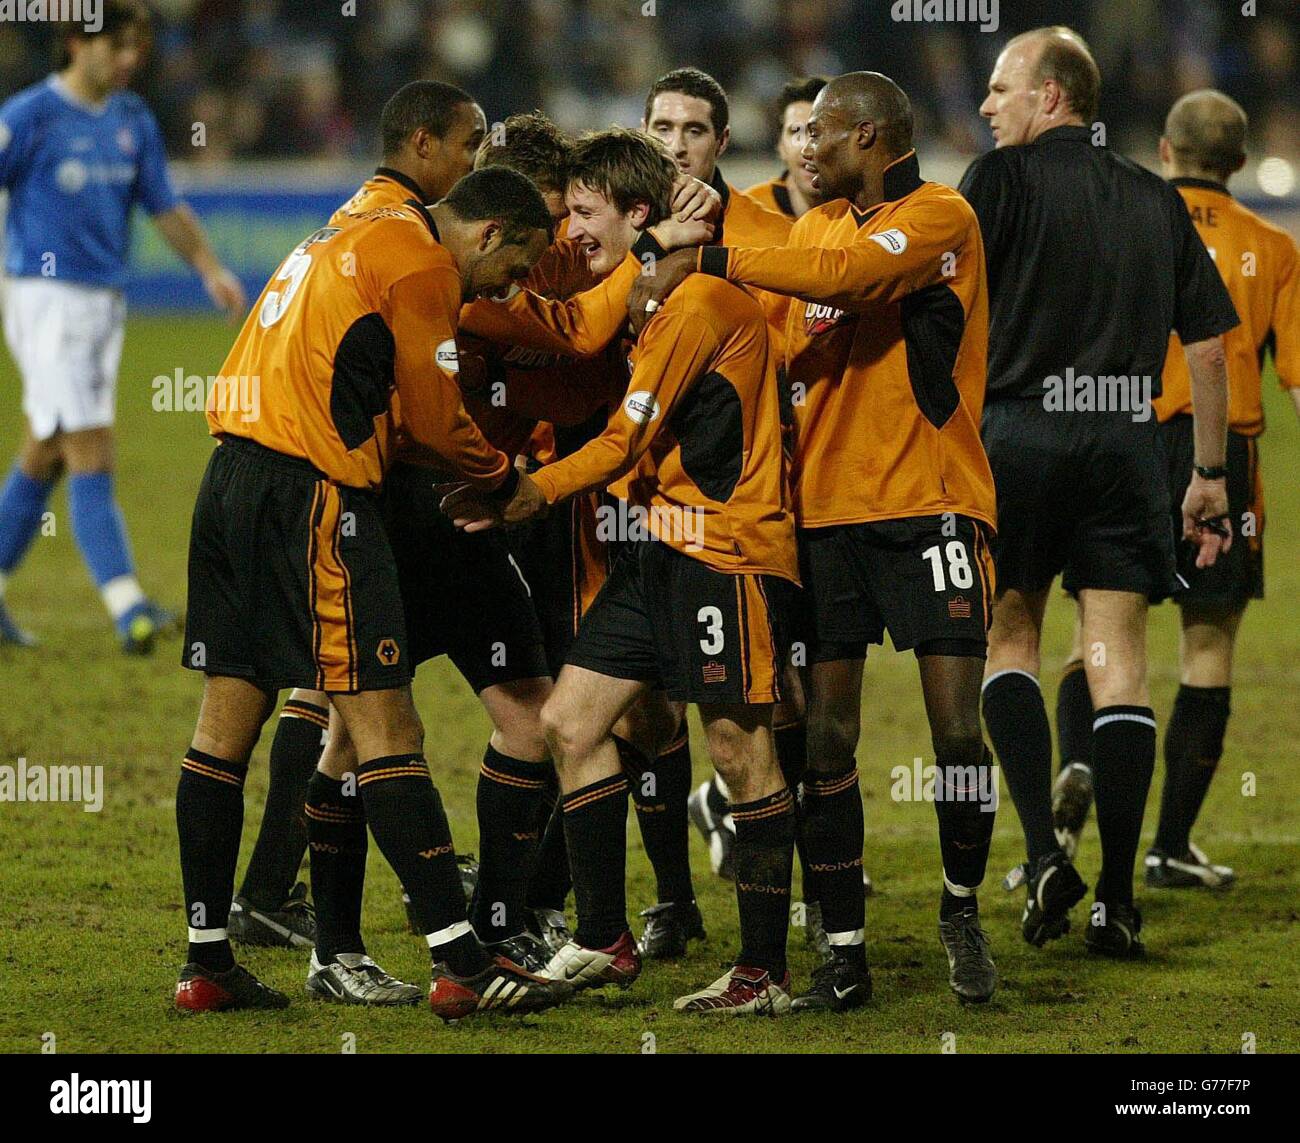 Wolves' Lee Naylor (centre, no.3) celebrates with team-mates after scoring against Ipswich Town during the Nationwide Division One game at Portman Road, Ipswich. NO UNOFFICIAL CLUB WEBSITE USE. Stock Photo